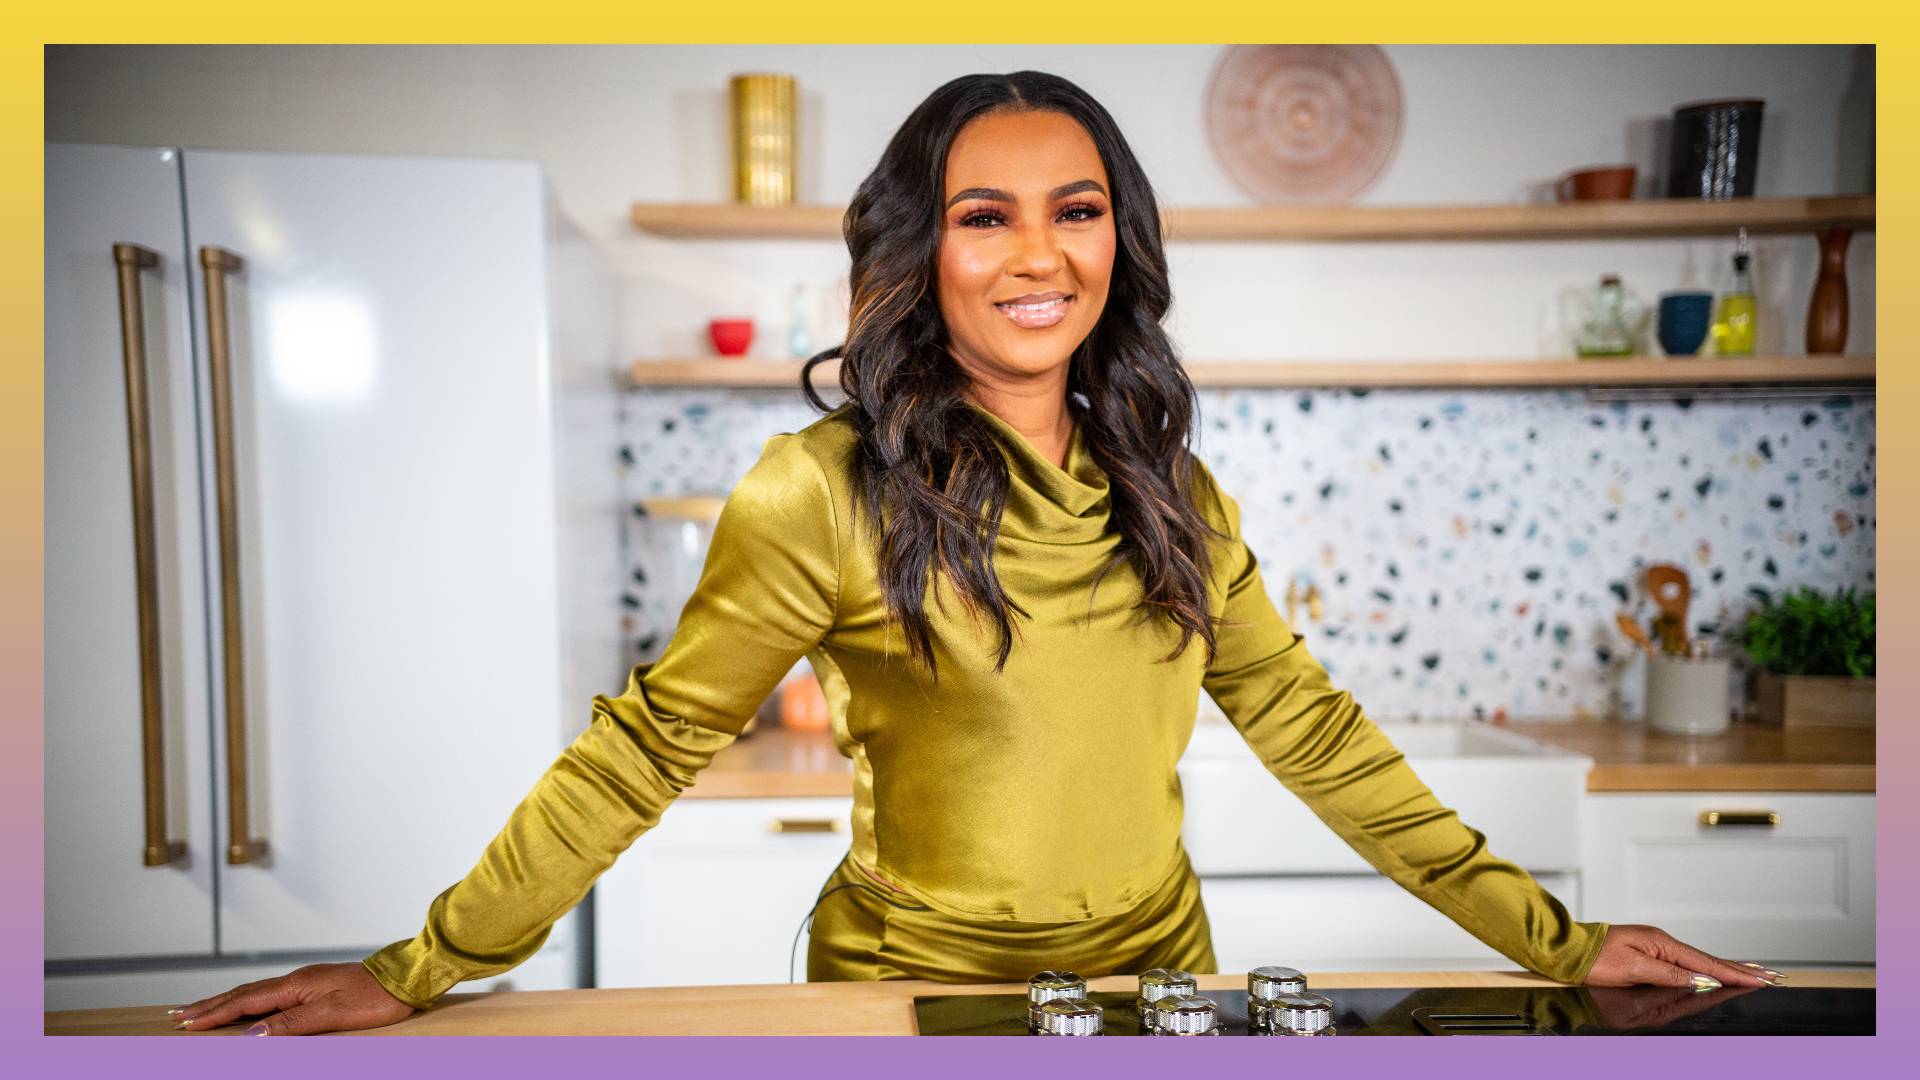 Tara Wallace Dishes On The Healing Power Of Soul Food, Self-Care, And Her New Talk Show!